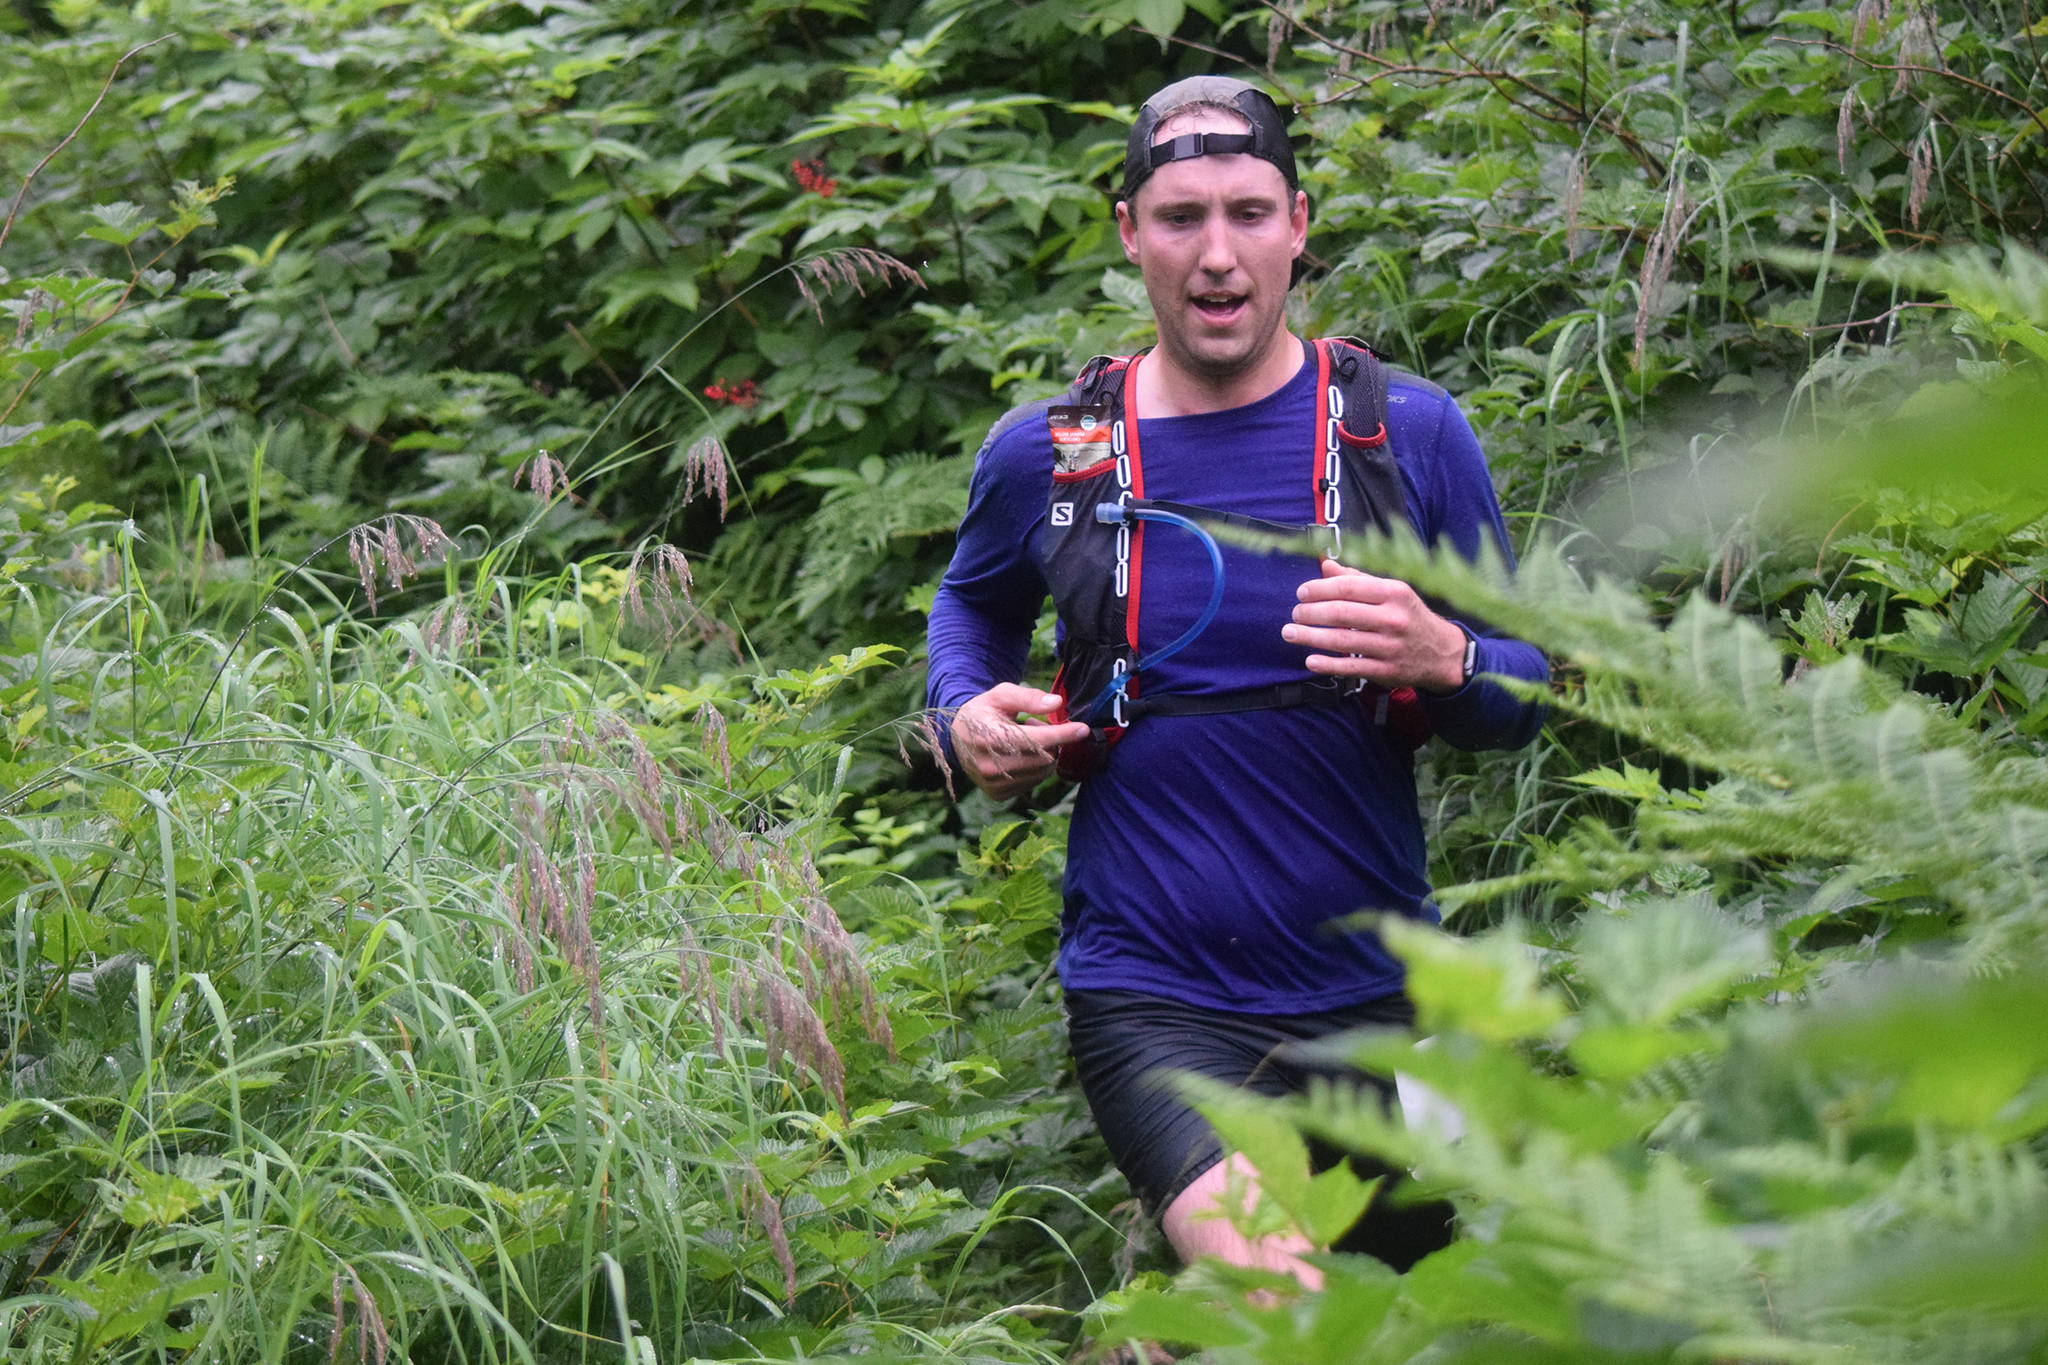 Thor Lindstrom descends from Mount Juneau along the Granite Creek Trail while competing in the Juneau Ridge Race on Saturday, July 20, 2019. Over 60 runners participated in the 15-mile mountain running race that featured approximately 5,000 feet of elevation gain. Lindstrom placed fourth overall with a time of 2:58:57. (Nolin Ainsworth | Juneau Empire)